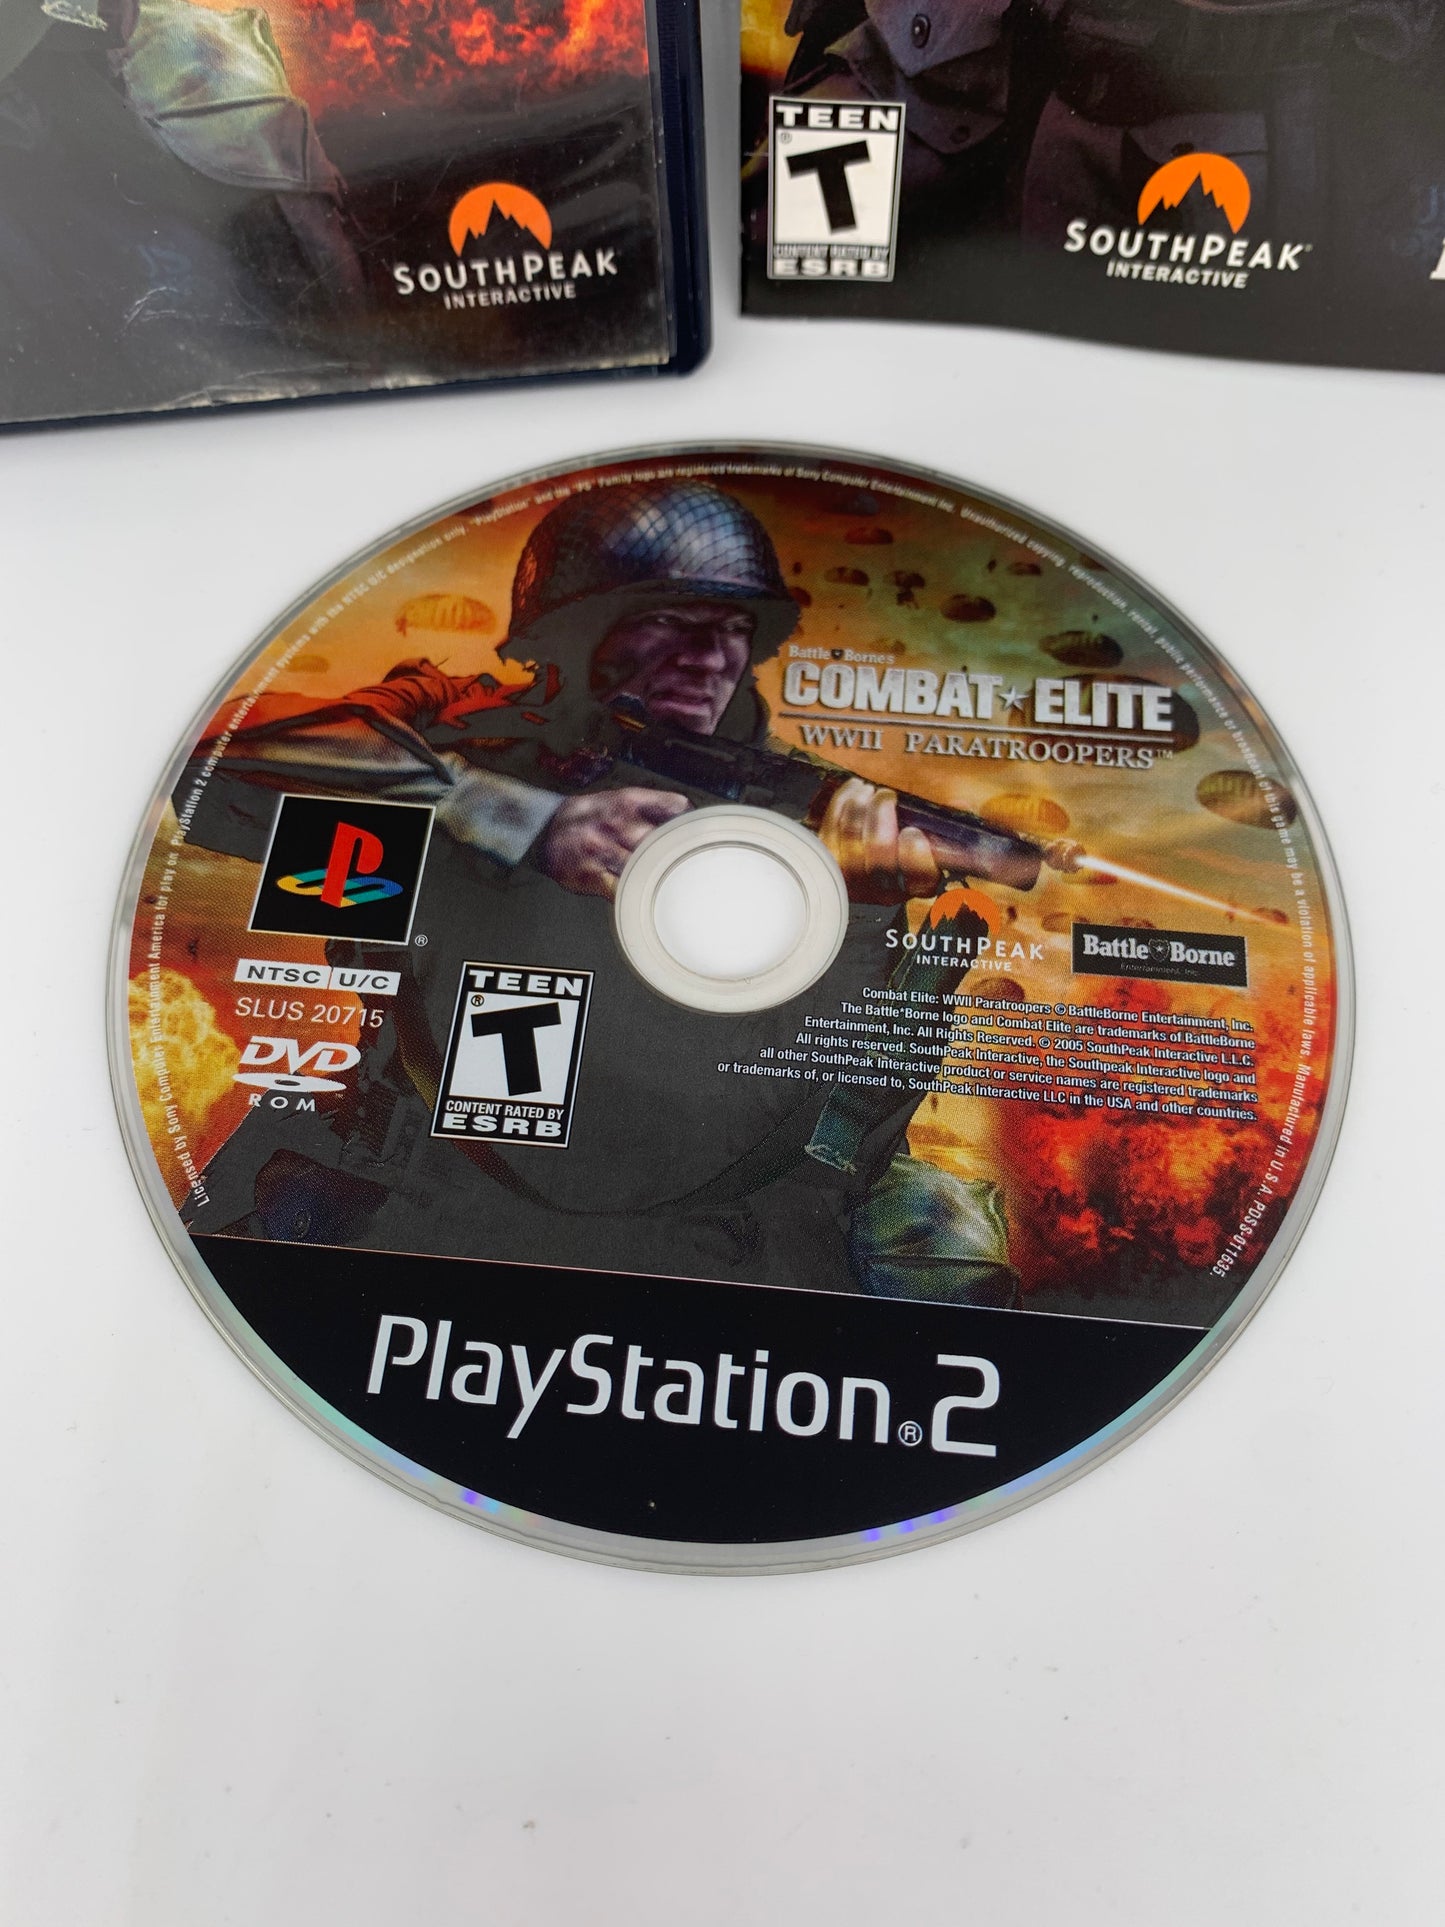 SONY PLAYSTATiON 2 [PS2] | COMBAT ELiTE WWI PARATROOPERS